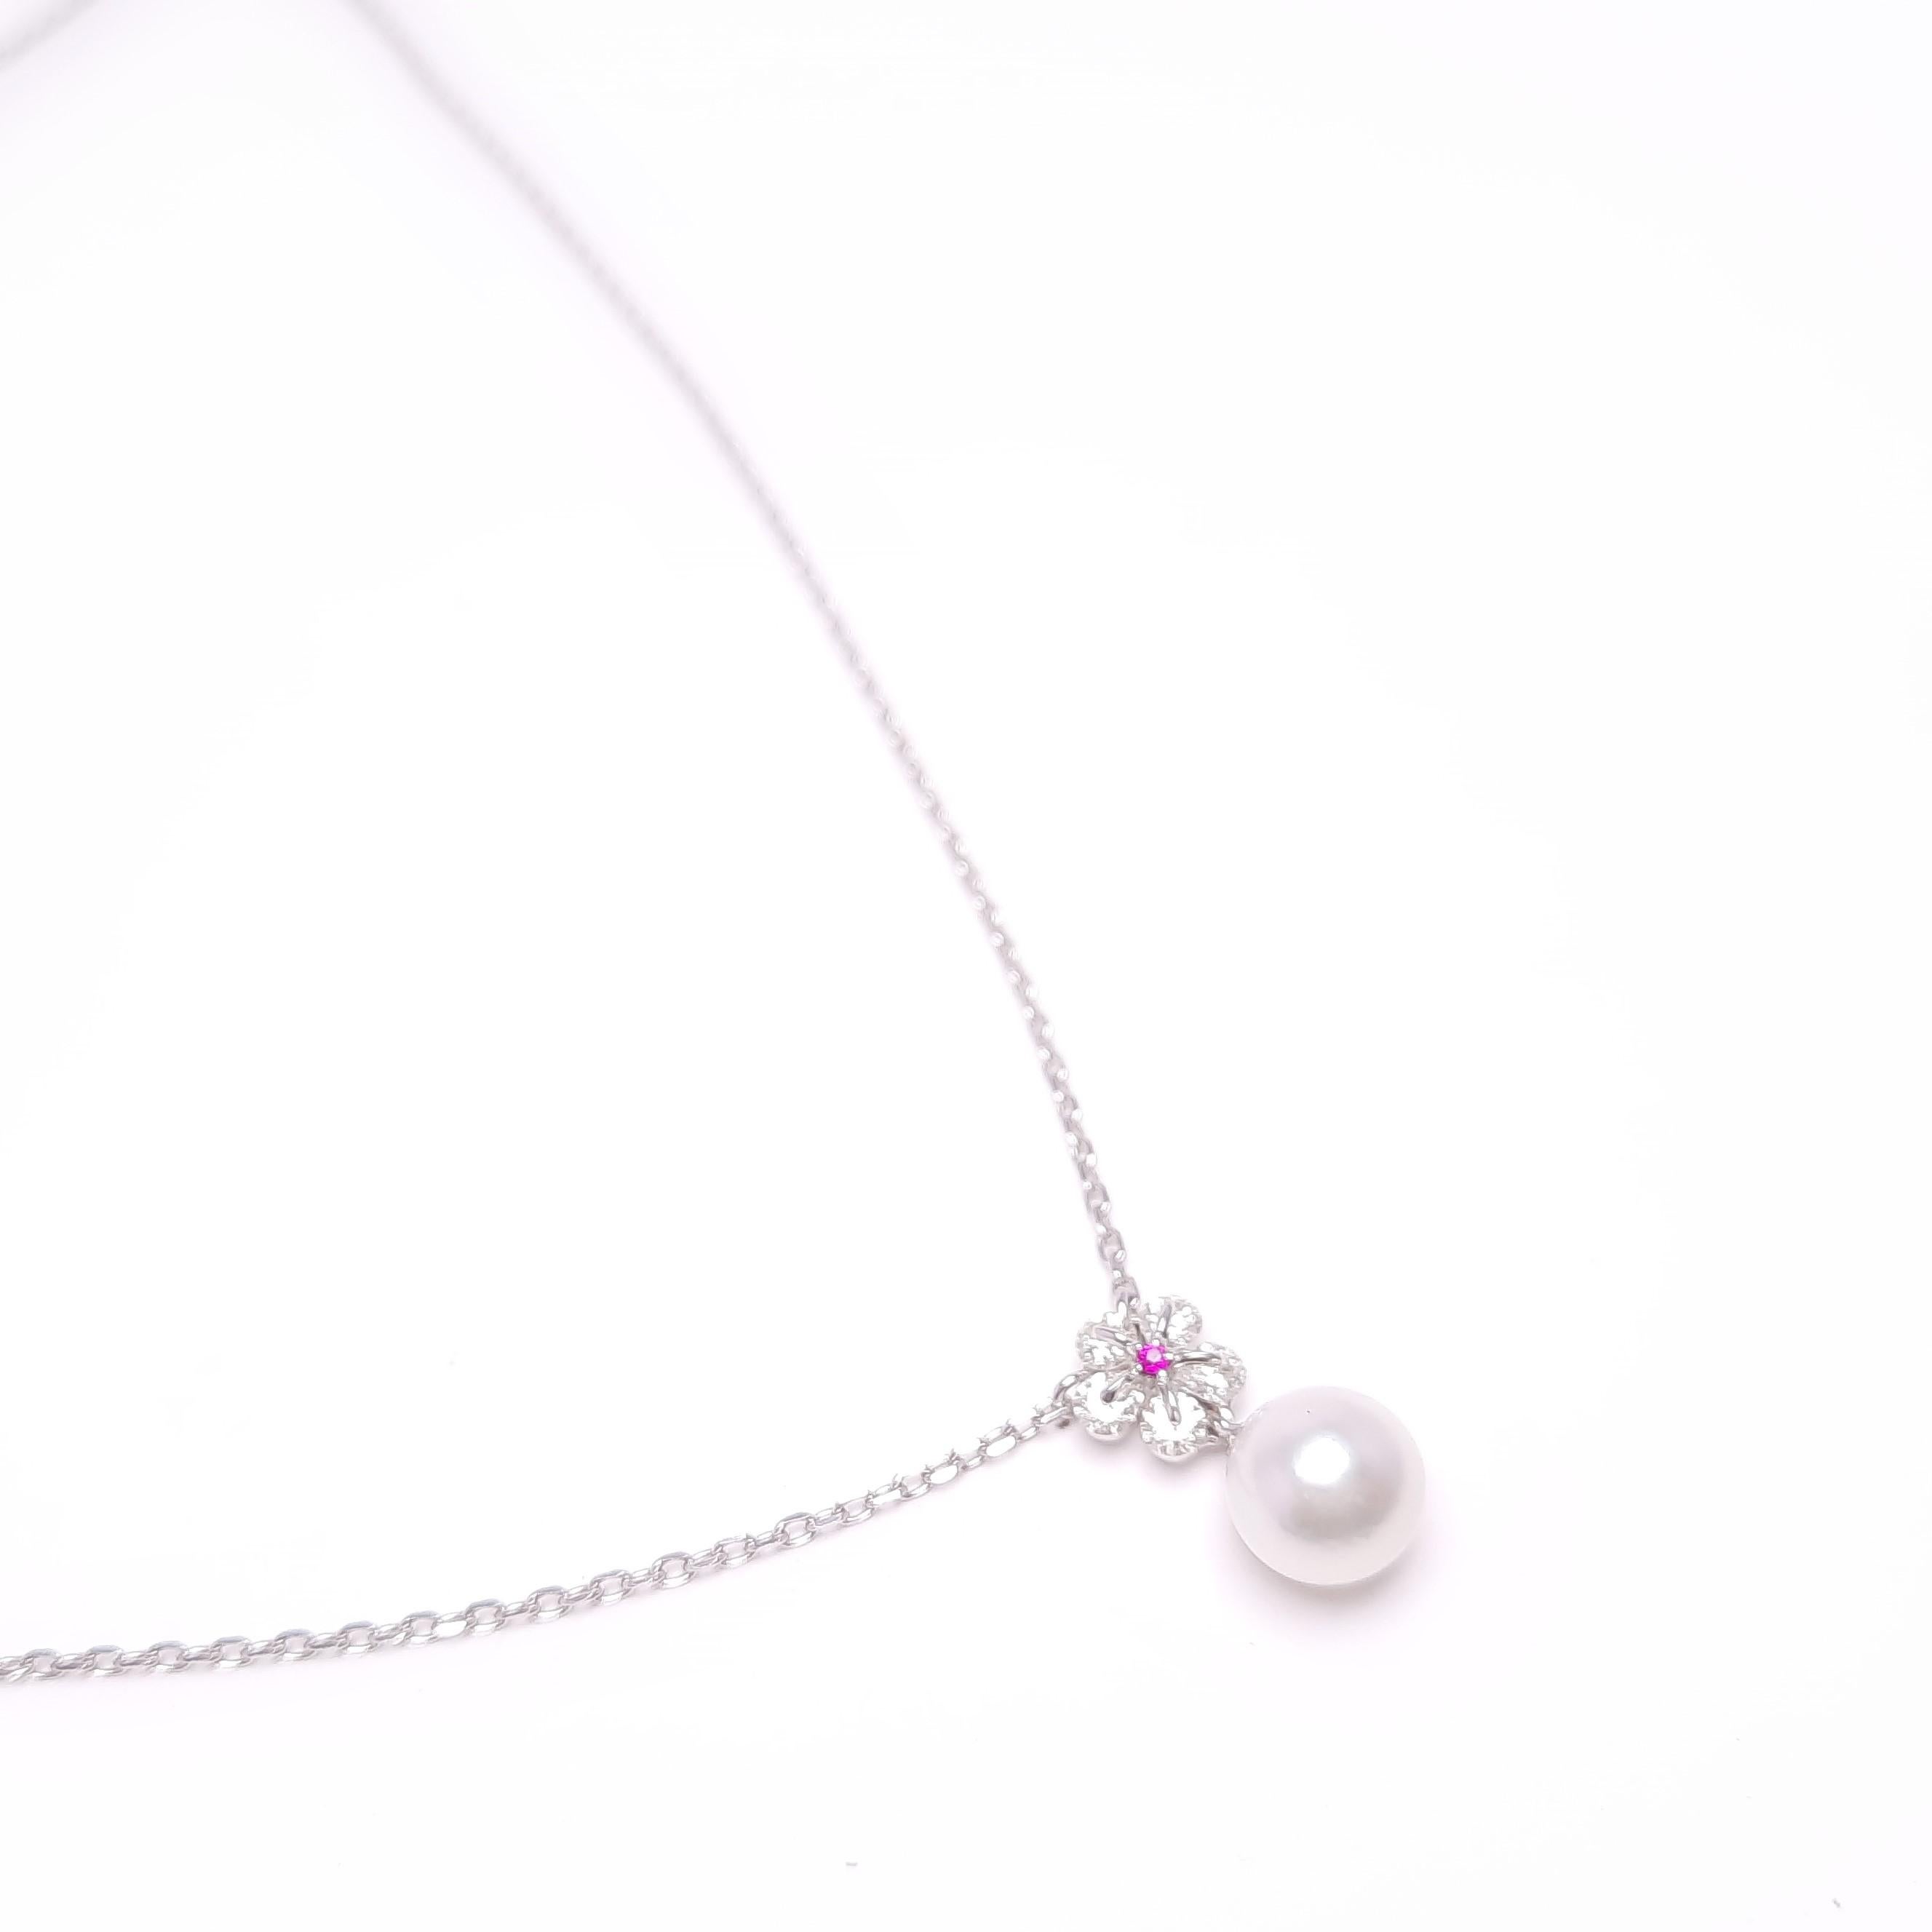 Diamond and pearls jewellery always suit any occasion.
This necklace is made of 18K white gold, pinkish 7-7.5mm Akoya pearl (AA grade+) from Japan, and diamonds mounted in the modern Russian setting 